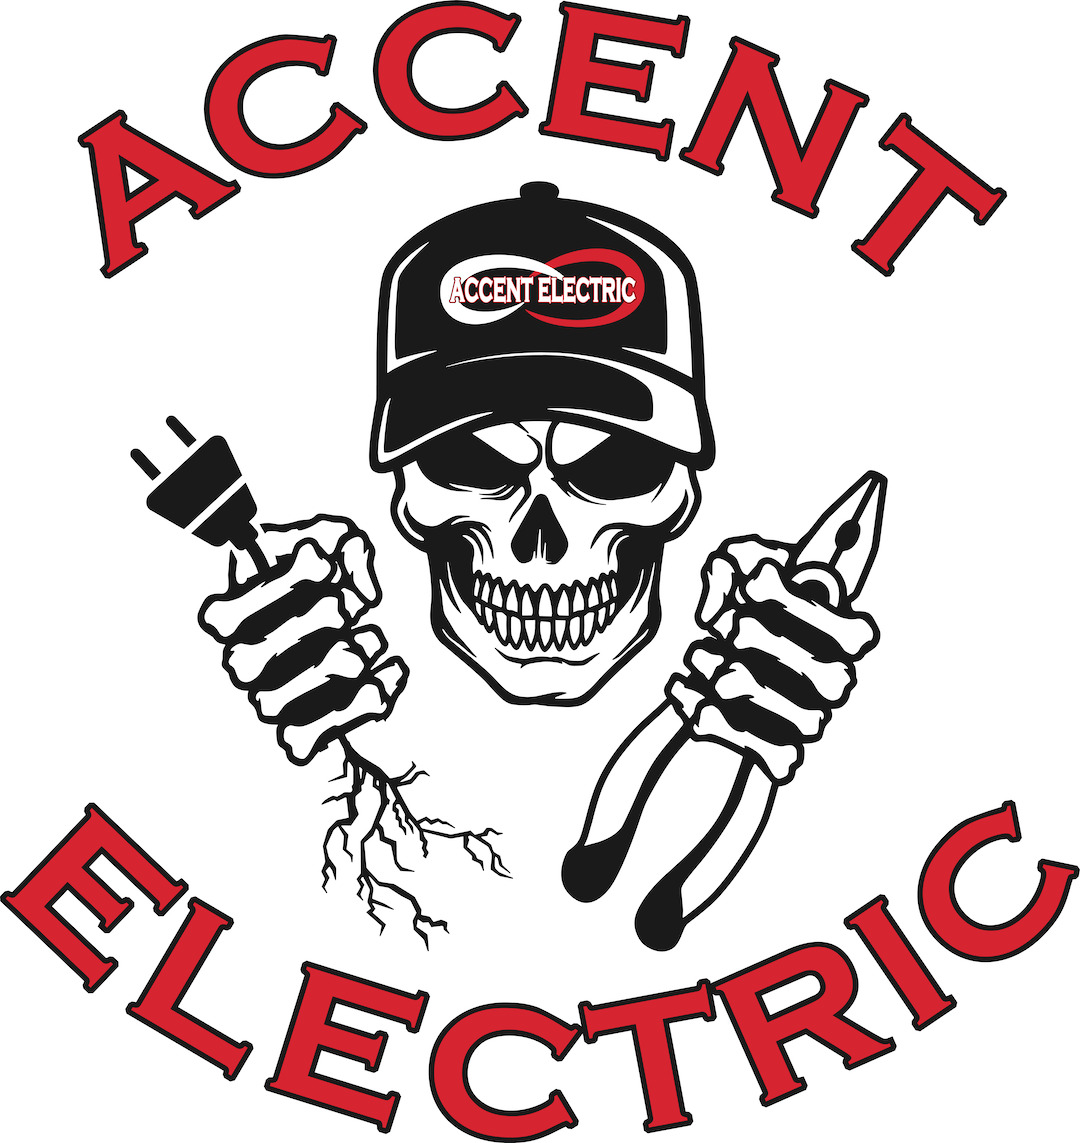 Accent Electric